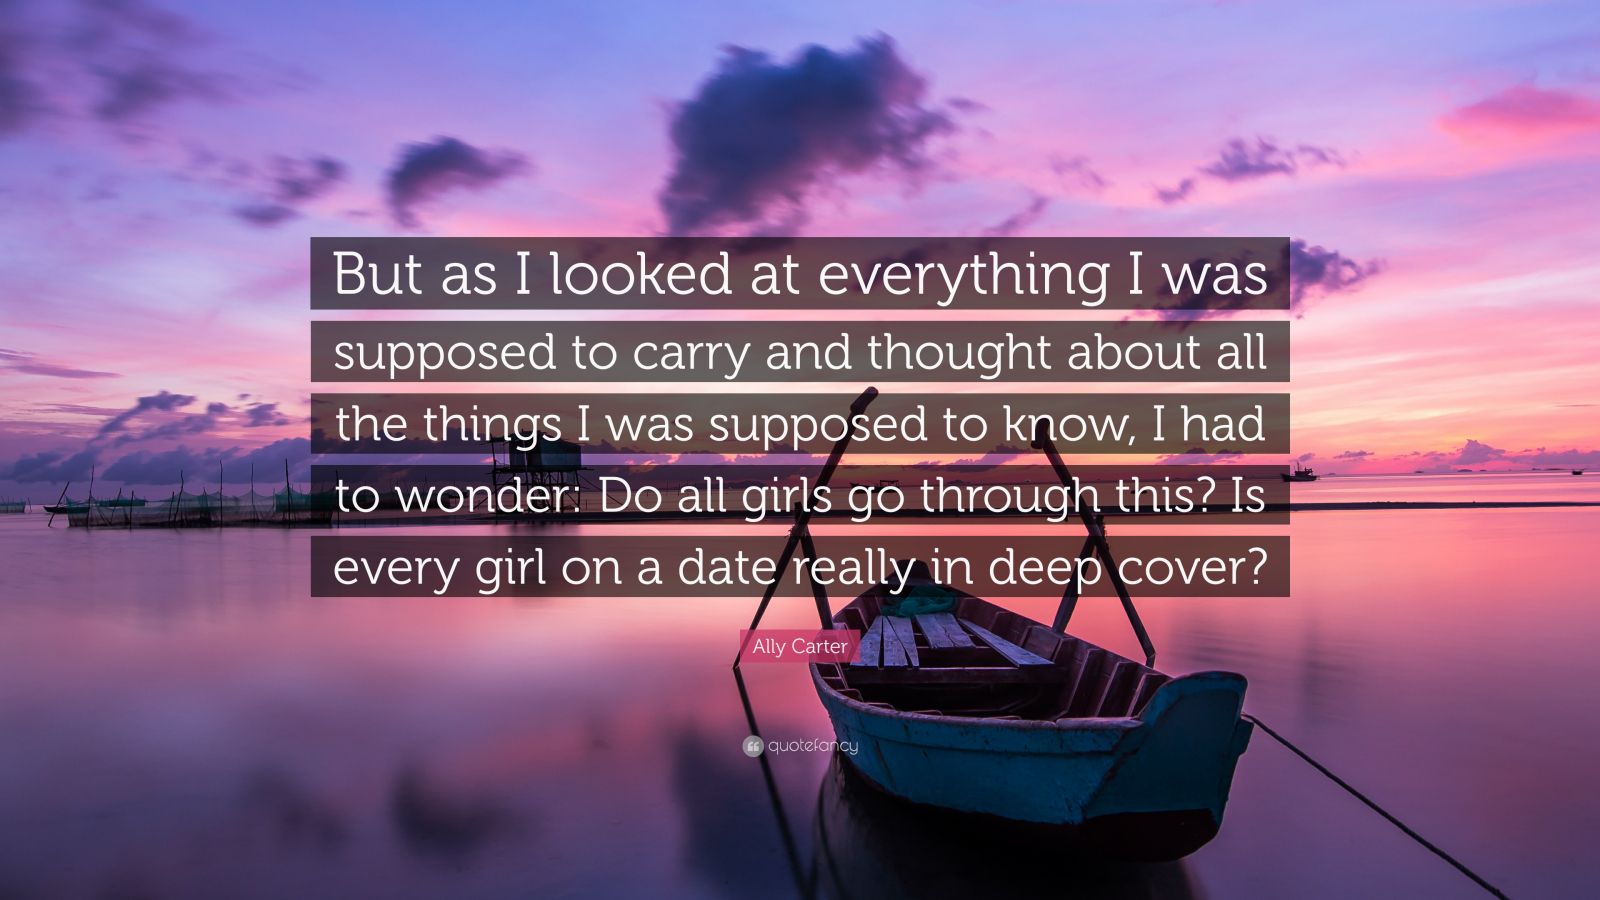 Ally Carter Quote: “But as I looked at everything I was supposed